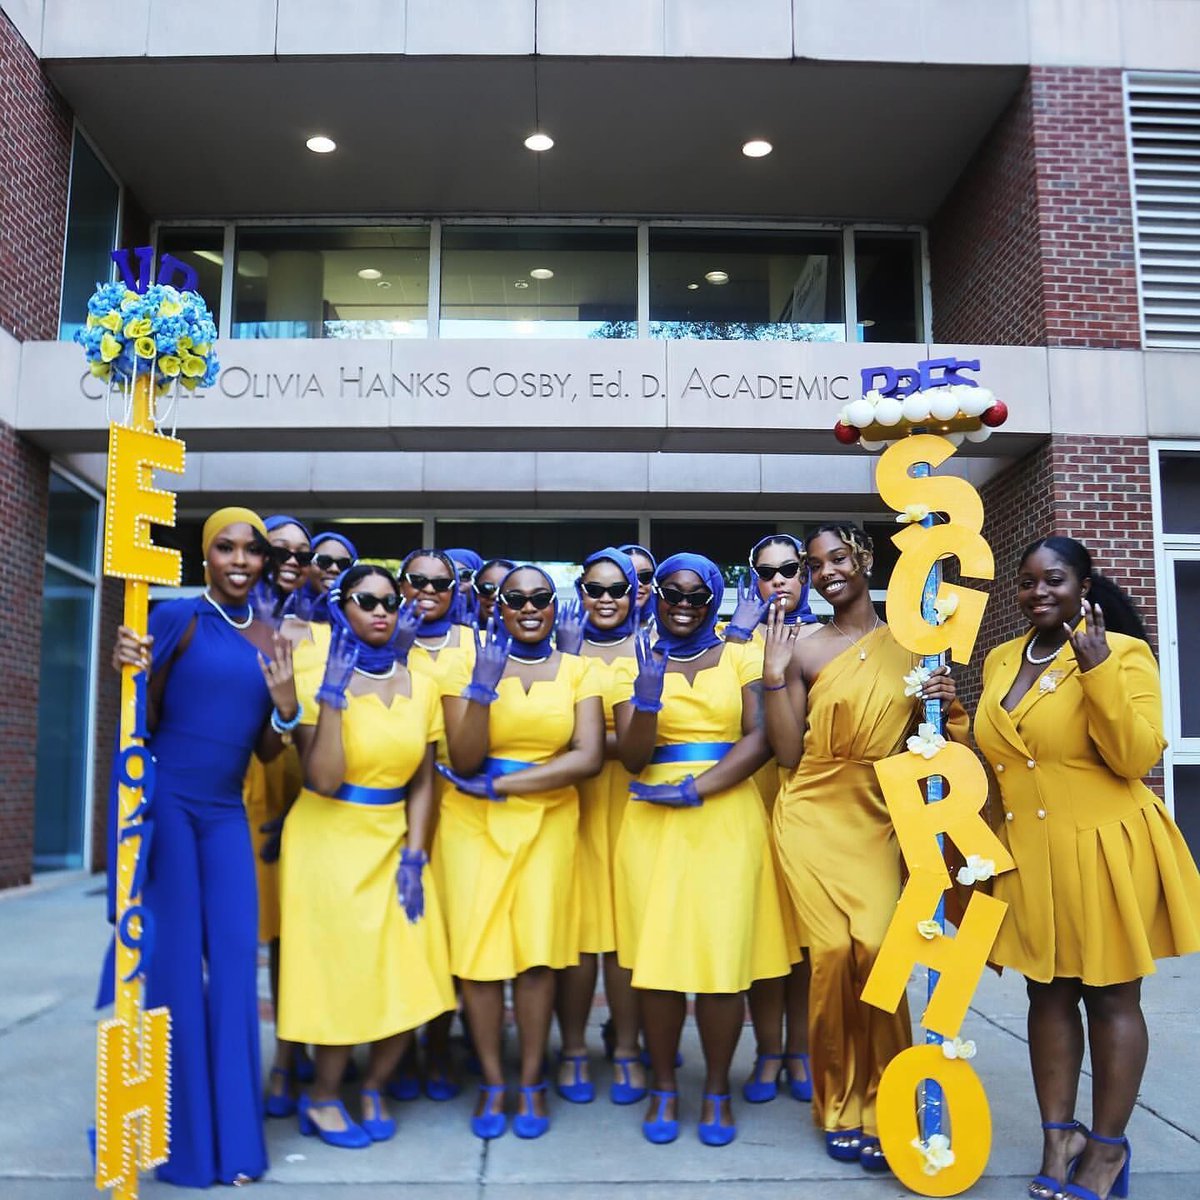 💙💛The sorors of Sigma Gamma Rho at Spelman College recently revealed their Spring 24 line! Let’s all show these new sorors some love! @spelmansgrhos